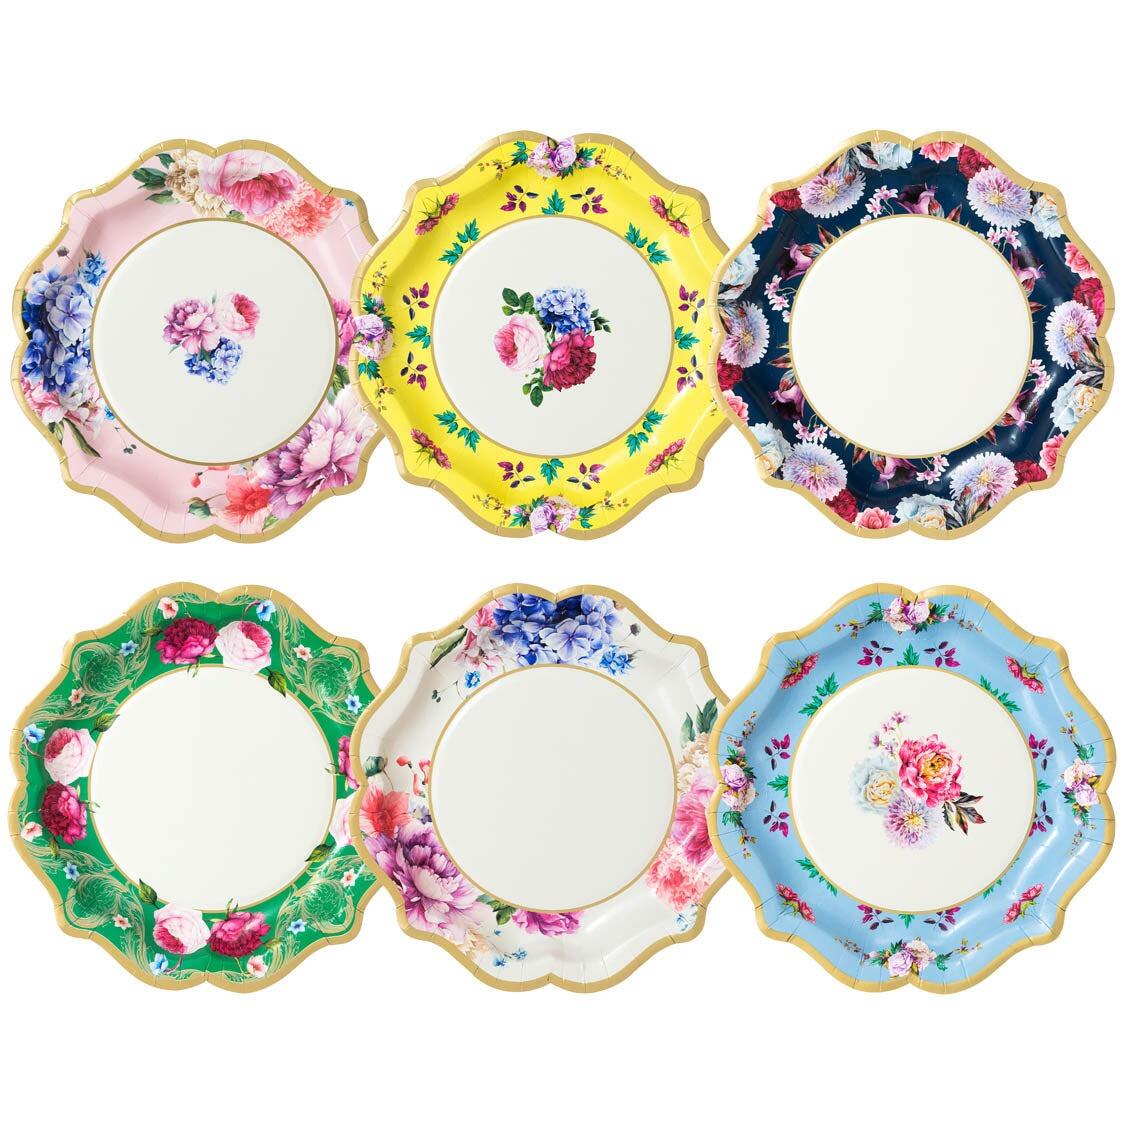 Afternoon tea party paper plates